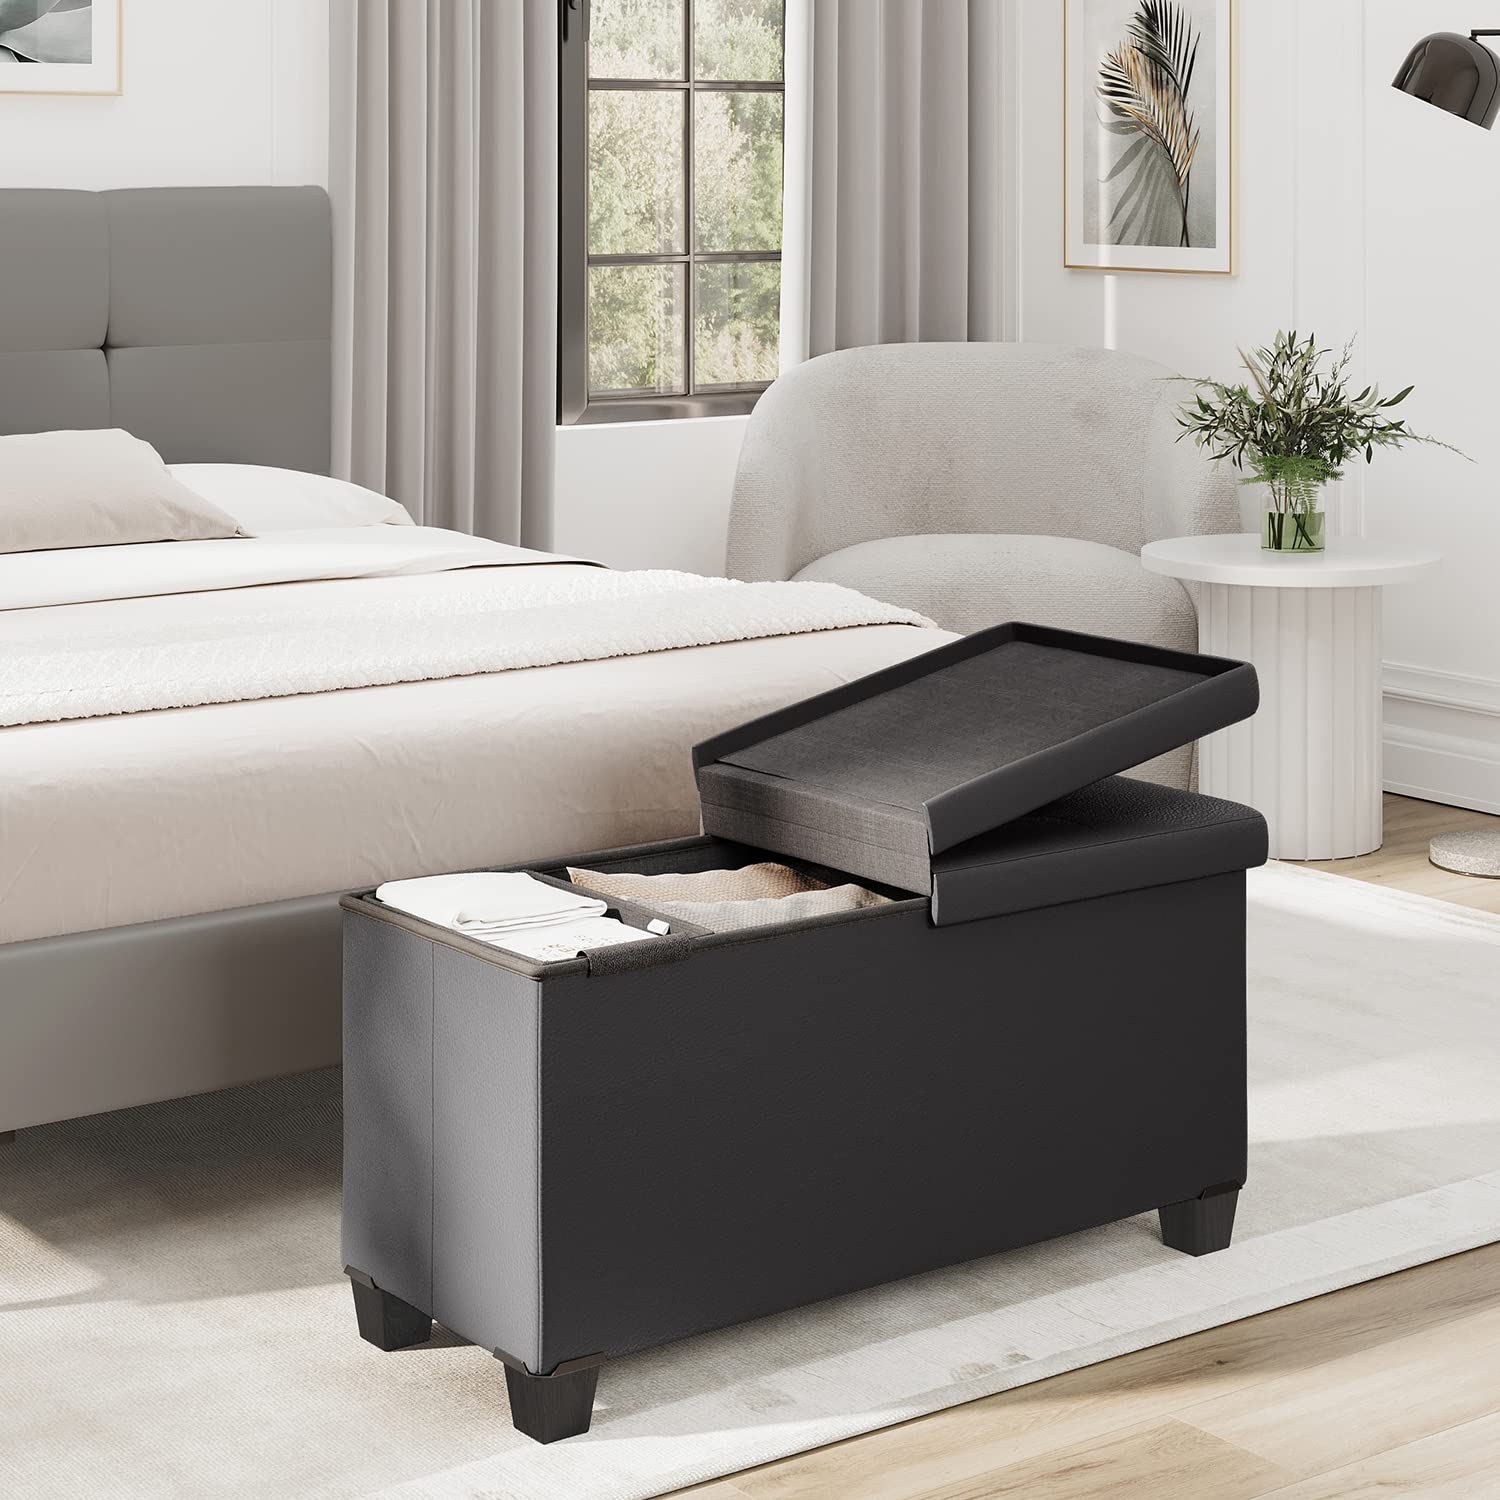 Hearth & Harbor Grey Faux Leather Storage Ottoman Bench with Removable Legs, 30-in, 660-lb Capacity